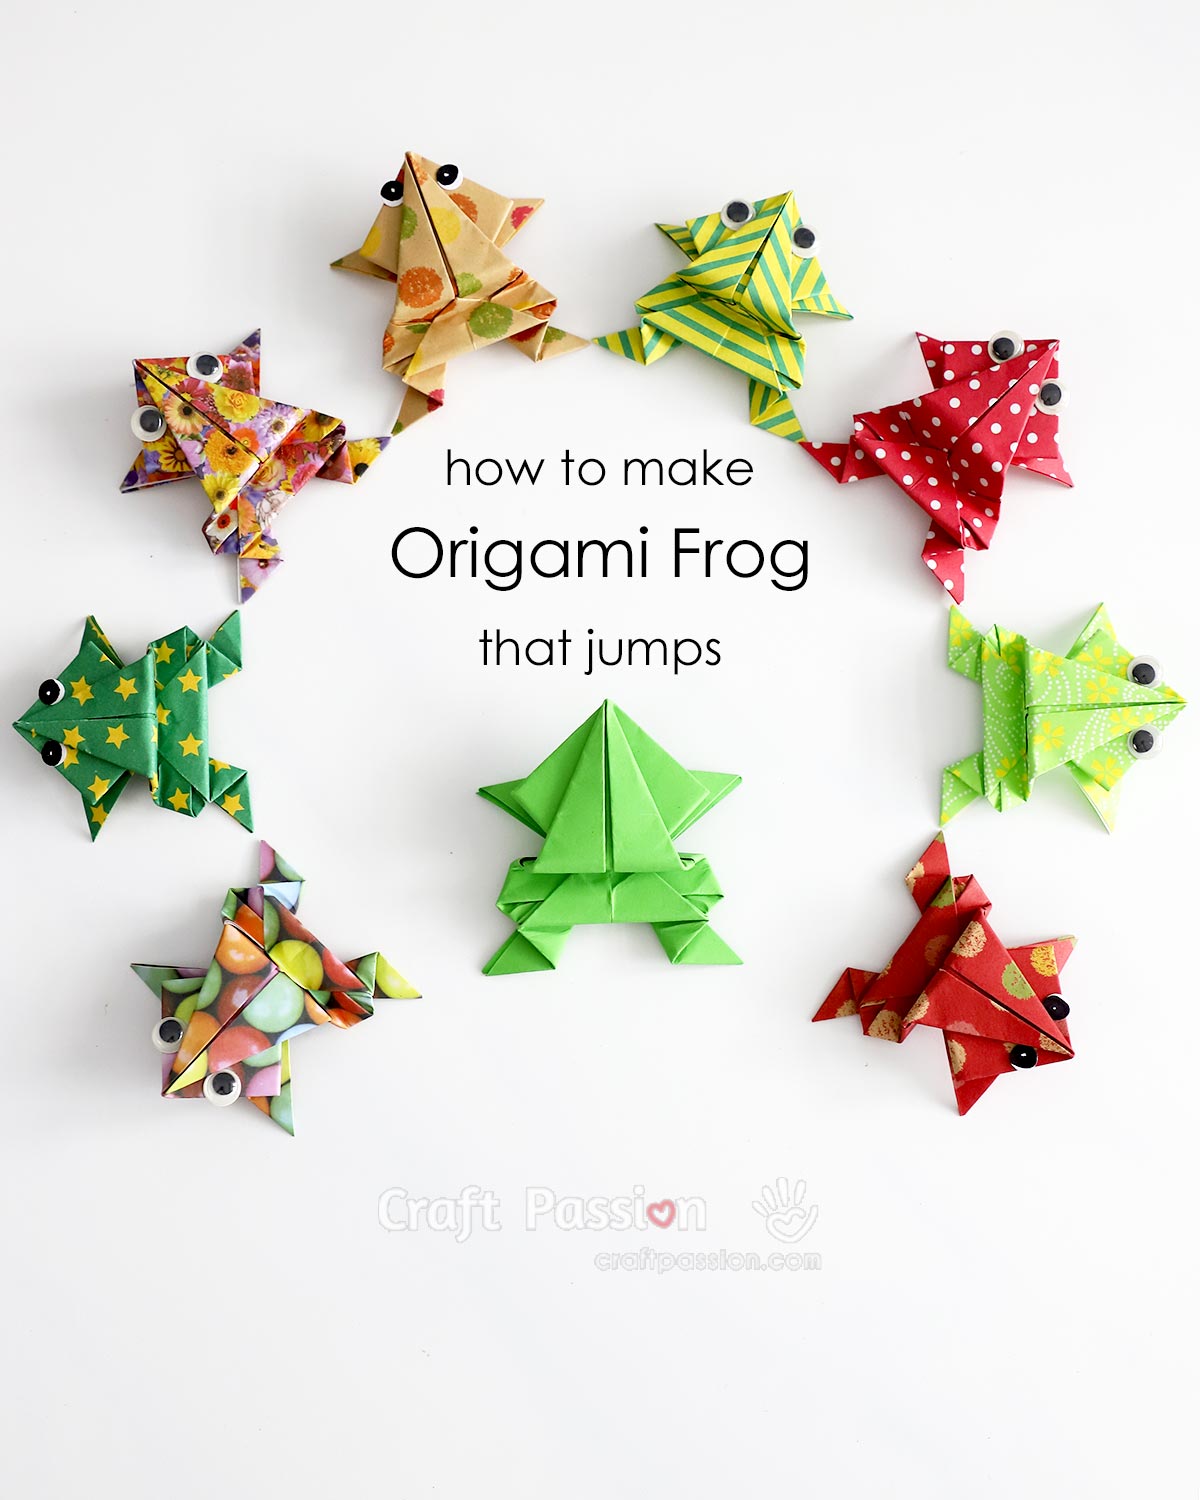 A piece of paper and 5 minutes for a whole lotta fun! Learn how to make an origami frog that jumps with a quick and easy step-by-step tutorial.